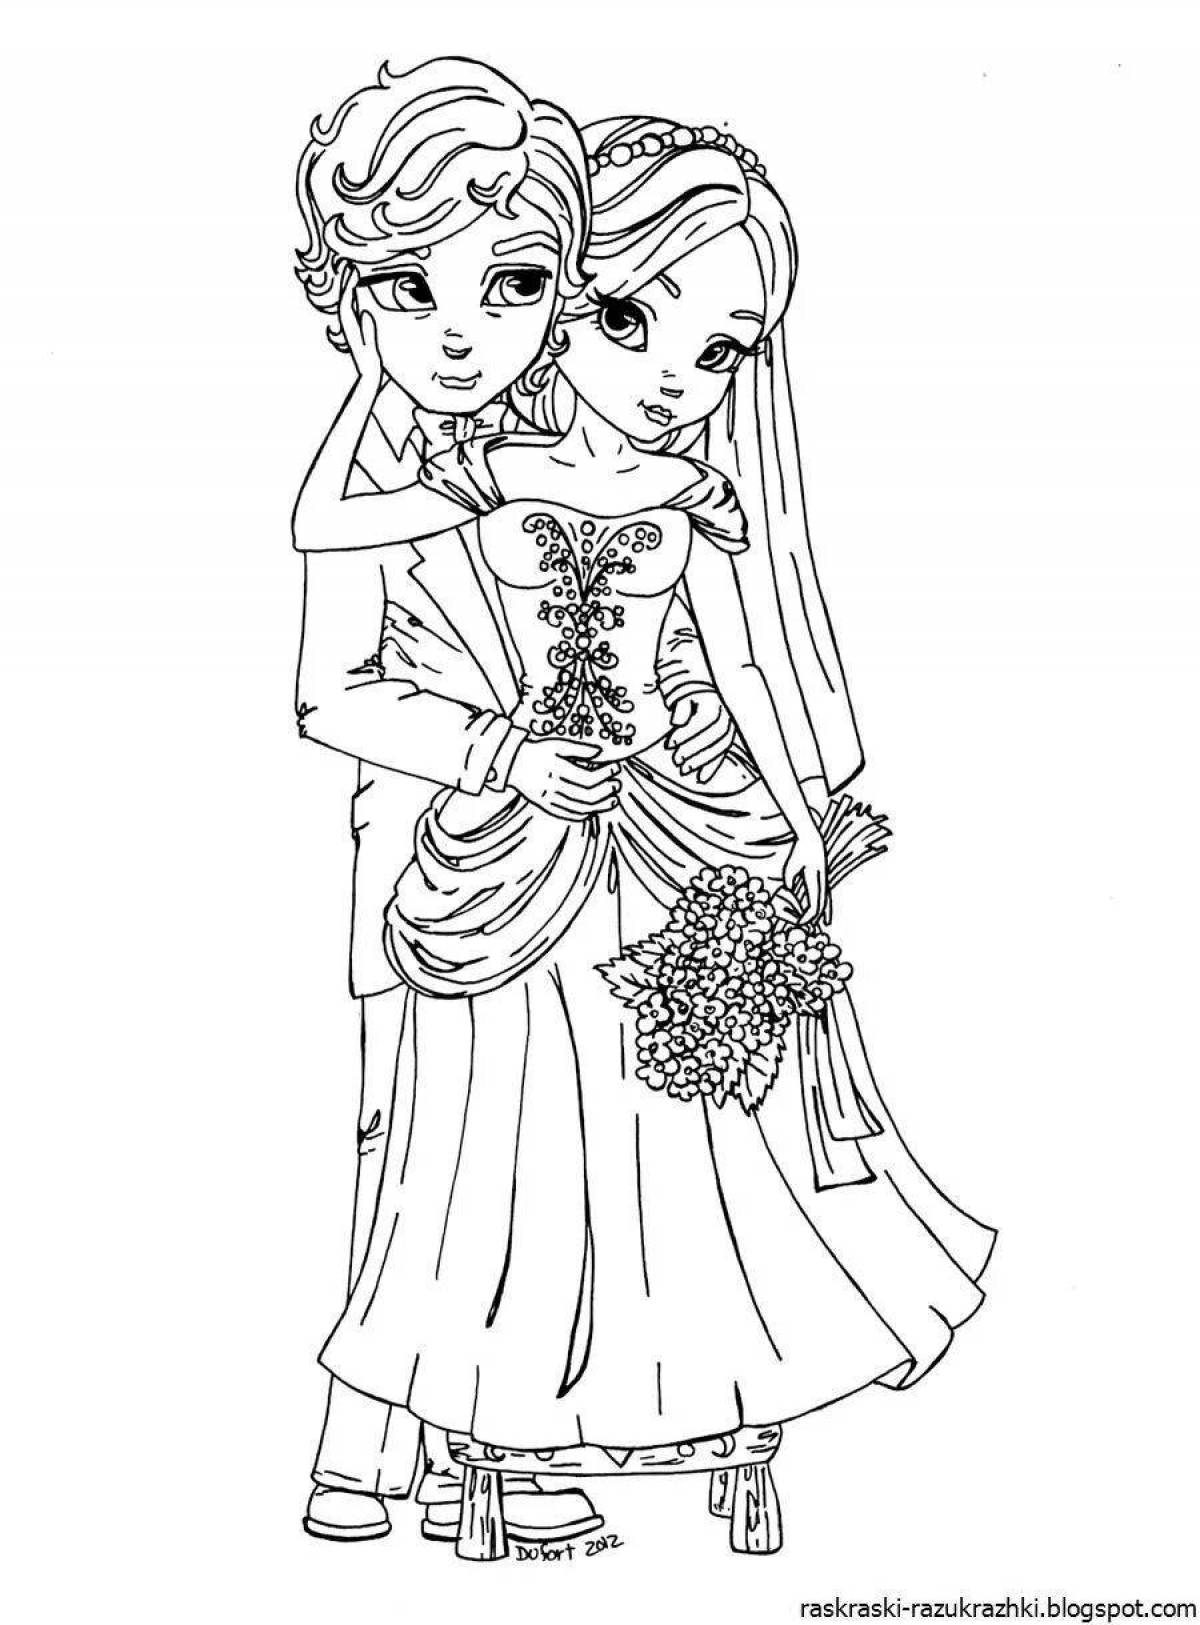 Coloring page 16 for girls